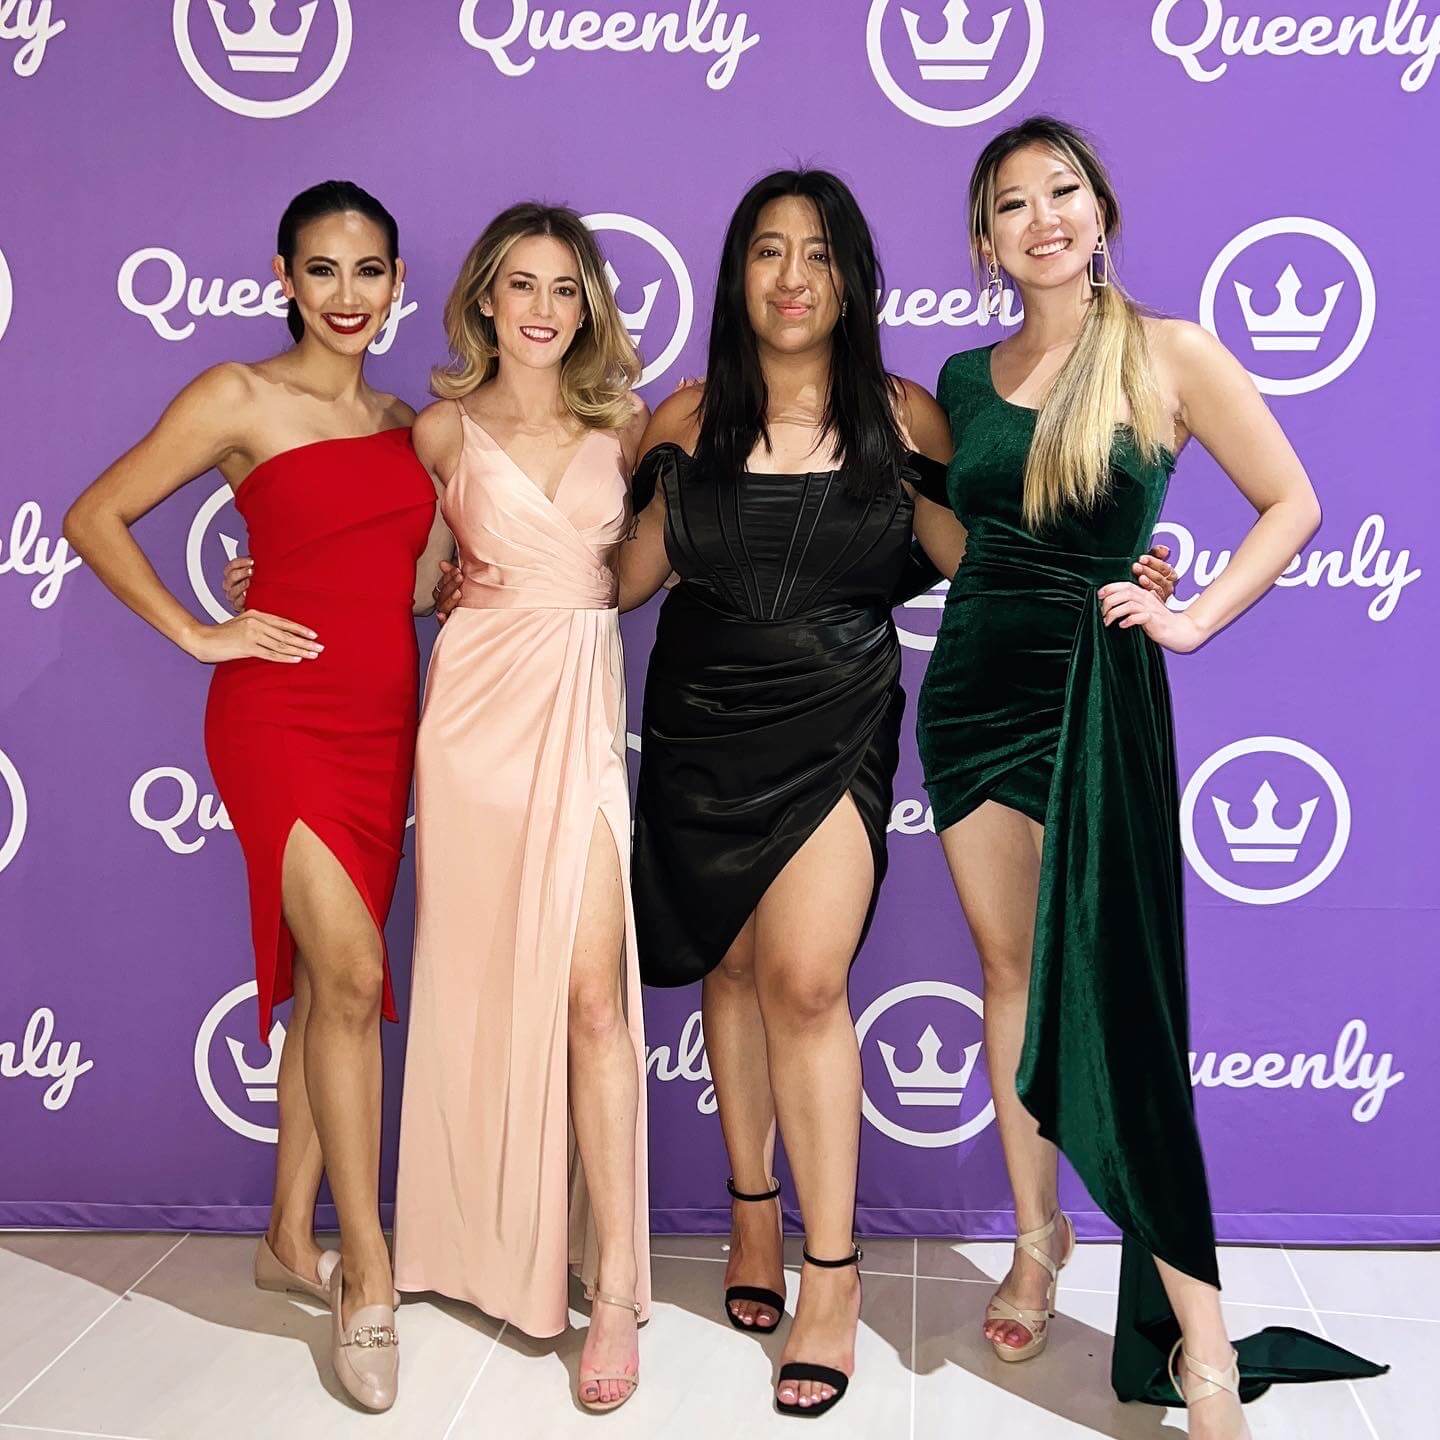 Queenly team in formal gowns at a pageant